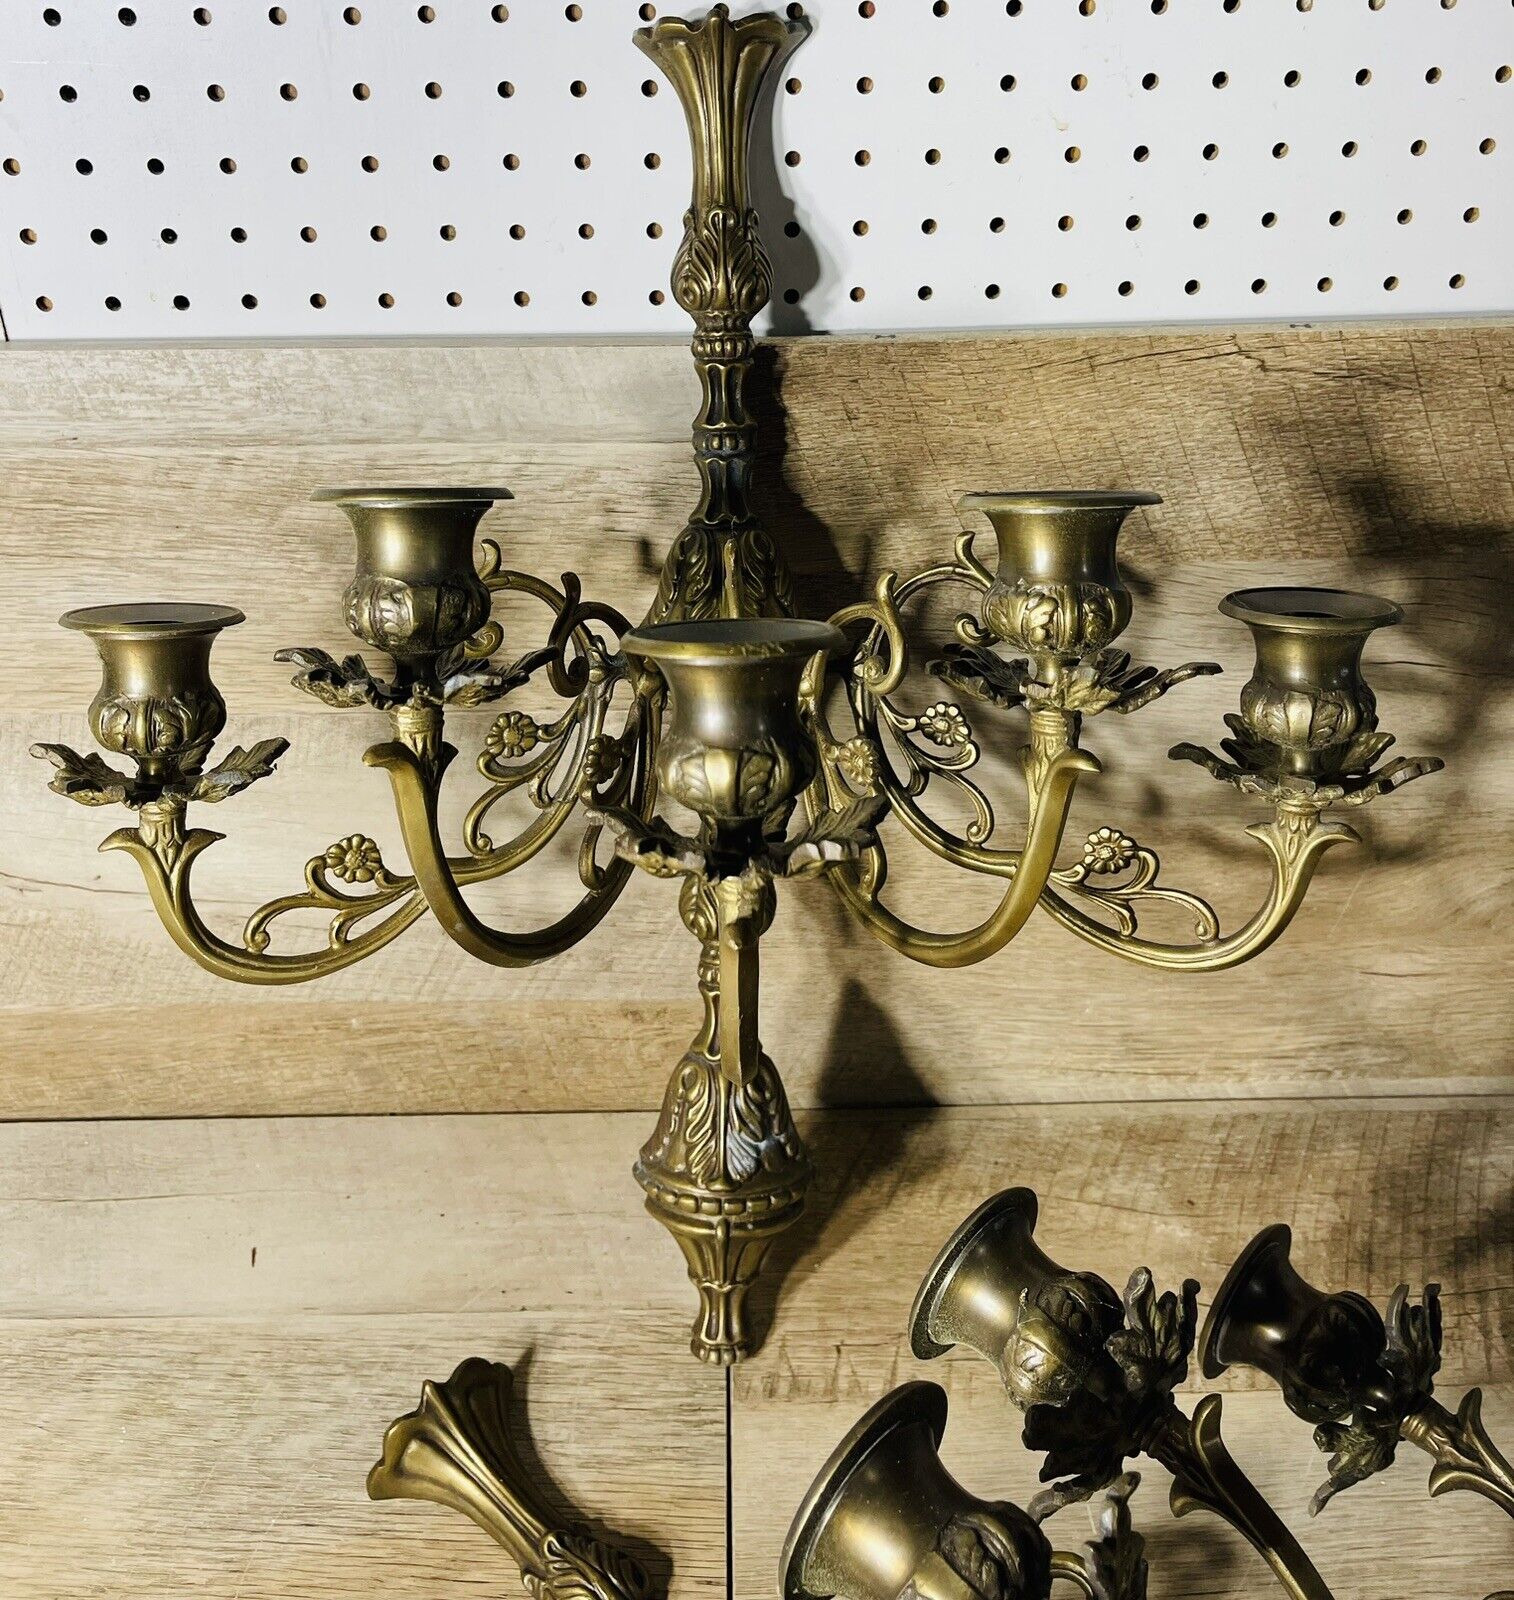 VTG Antique Baroque Style Large Solid Brass 5 Candle Wall Sconce Pair